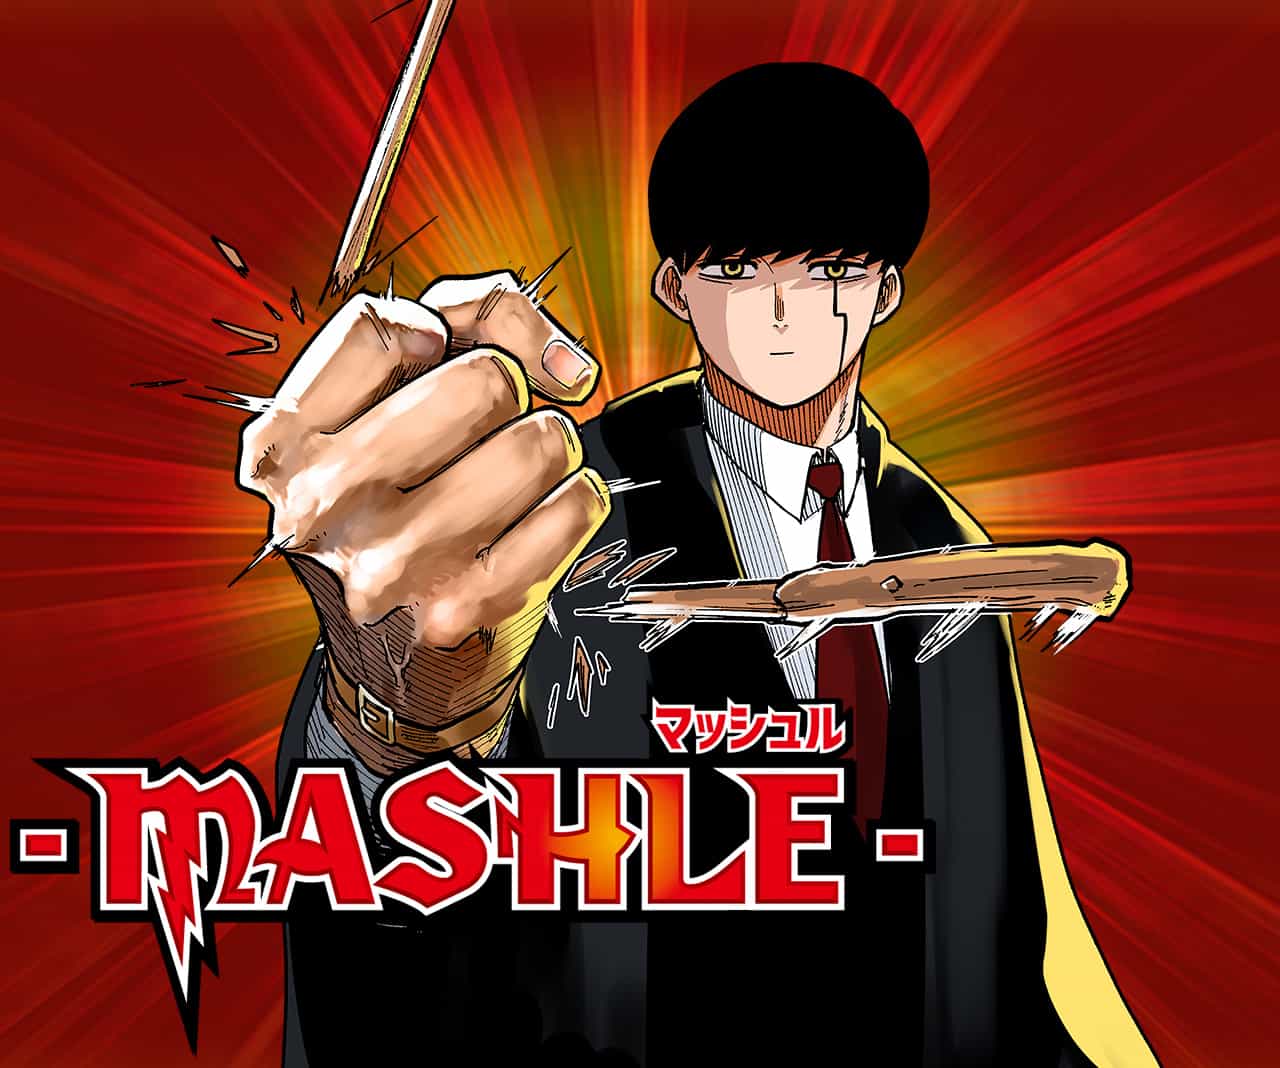 Mashle: Magic And Muscles Anime Release Date Confirmed